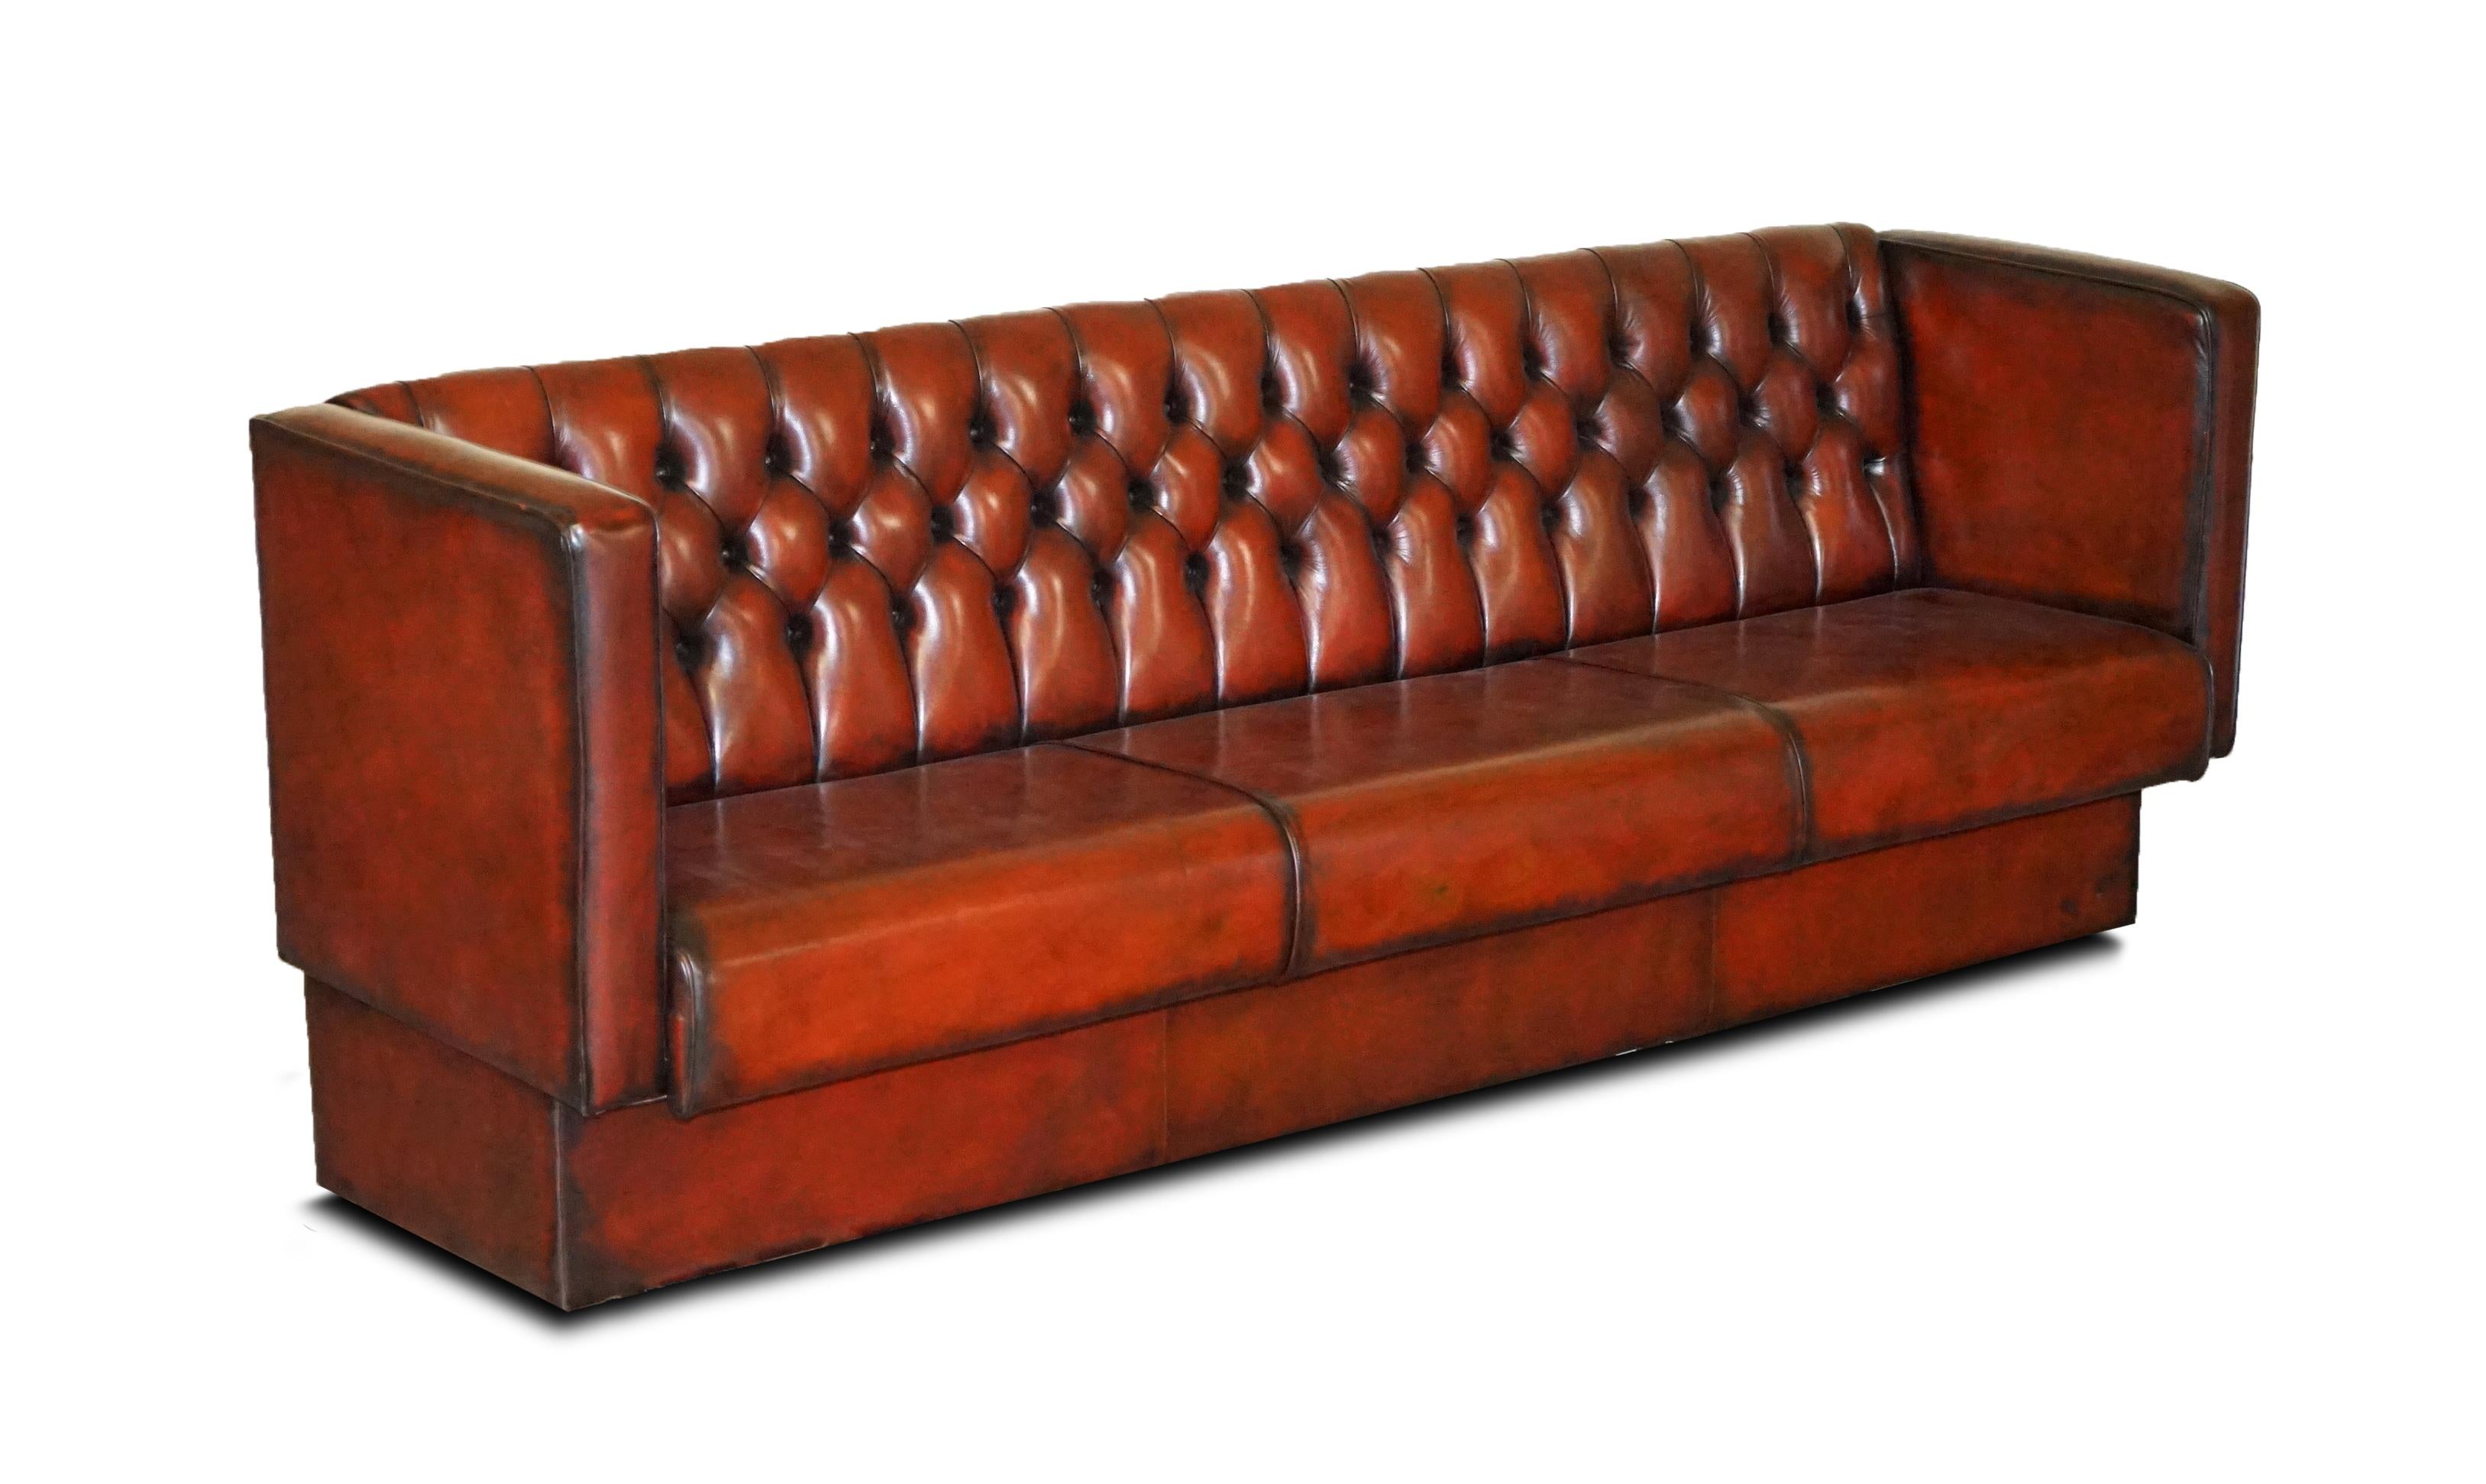 We are delighted to offer for sale this stunning pair of huge 4-5 seat each, fully restored rich brown leather Chesterfield bench sofas

These are a very solid and well made pair of large bench sofas, they seat 10 without too much bother and could